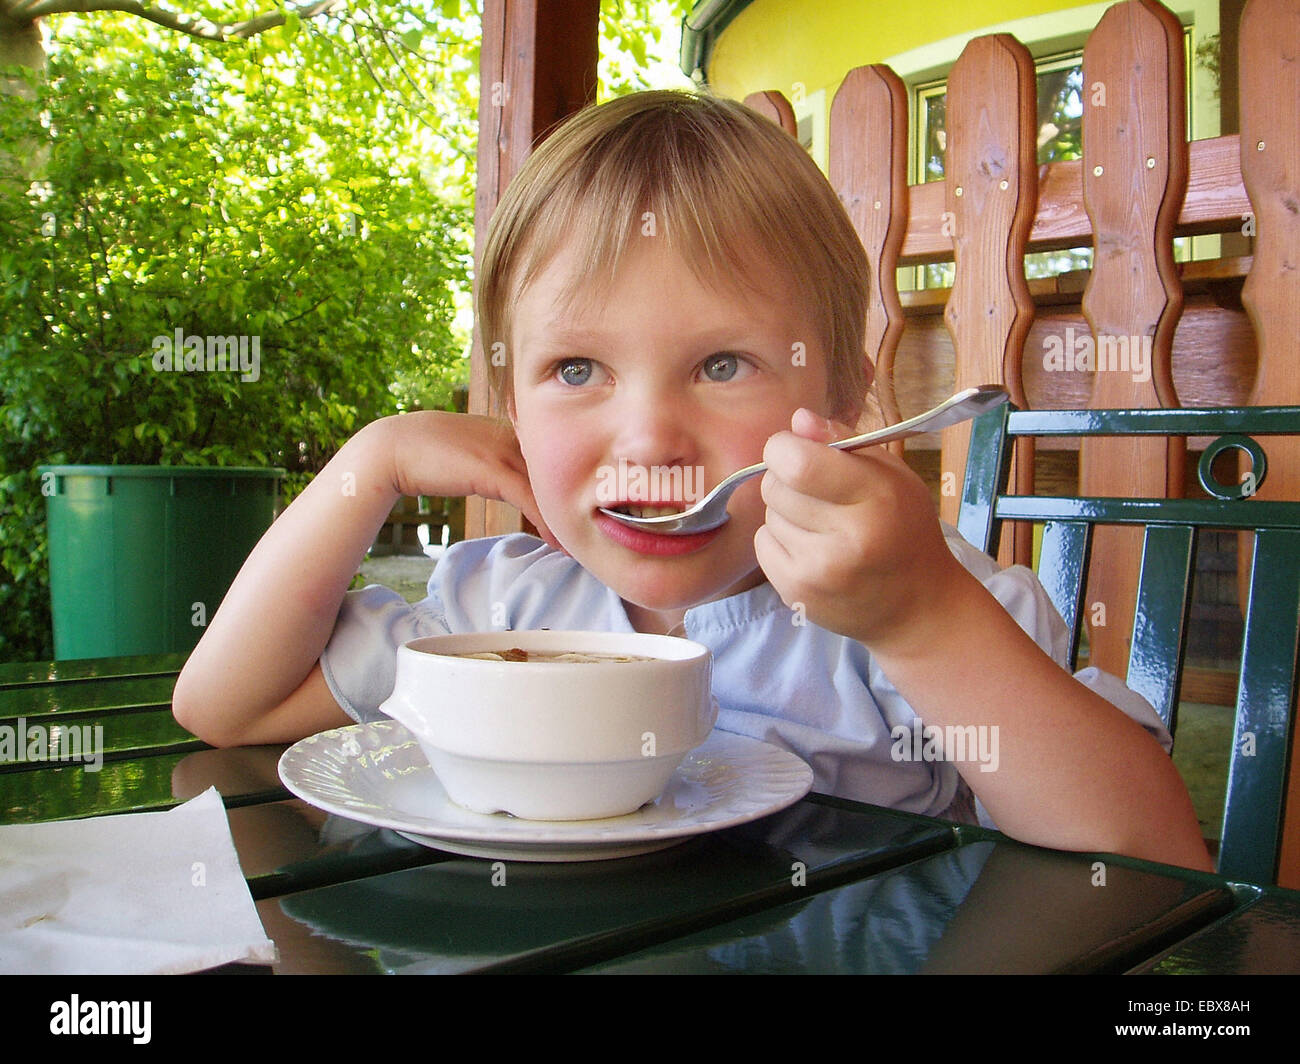 little girl is eating soup Stock Photo